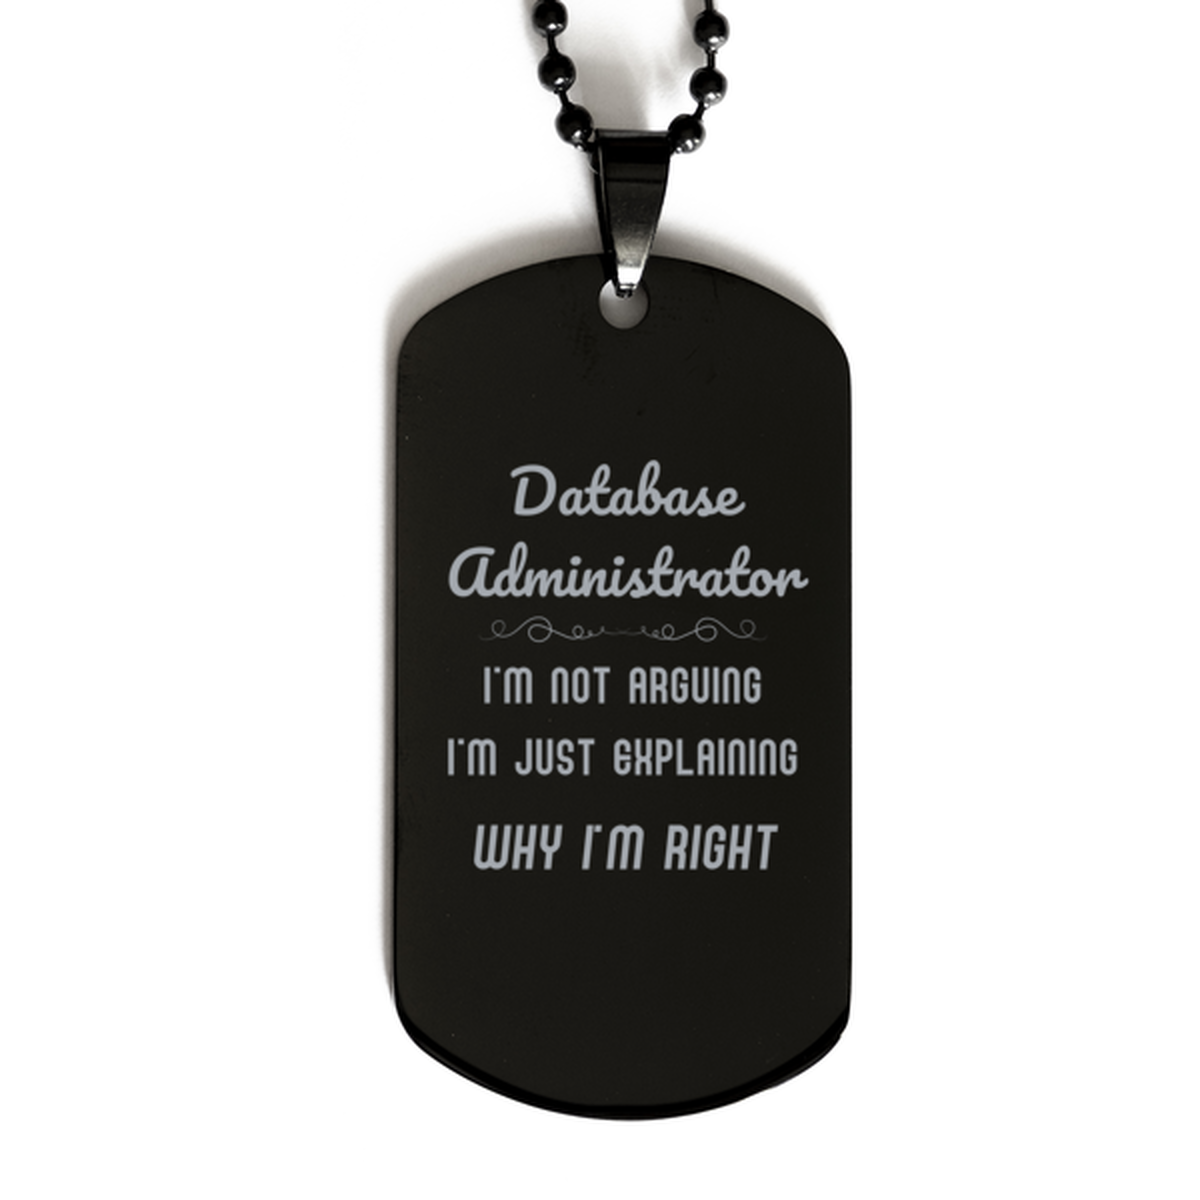 Database Administrator I'm not Arguing. I'm Just Explaining Why I'm RIGHT Black Dog Tag, Funny Saying Quote Database Administrator Gifts For Database Administrator Graduation Birthday Christmas Gifts for Men Women Coworker